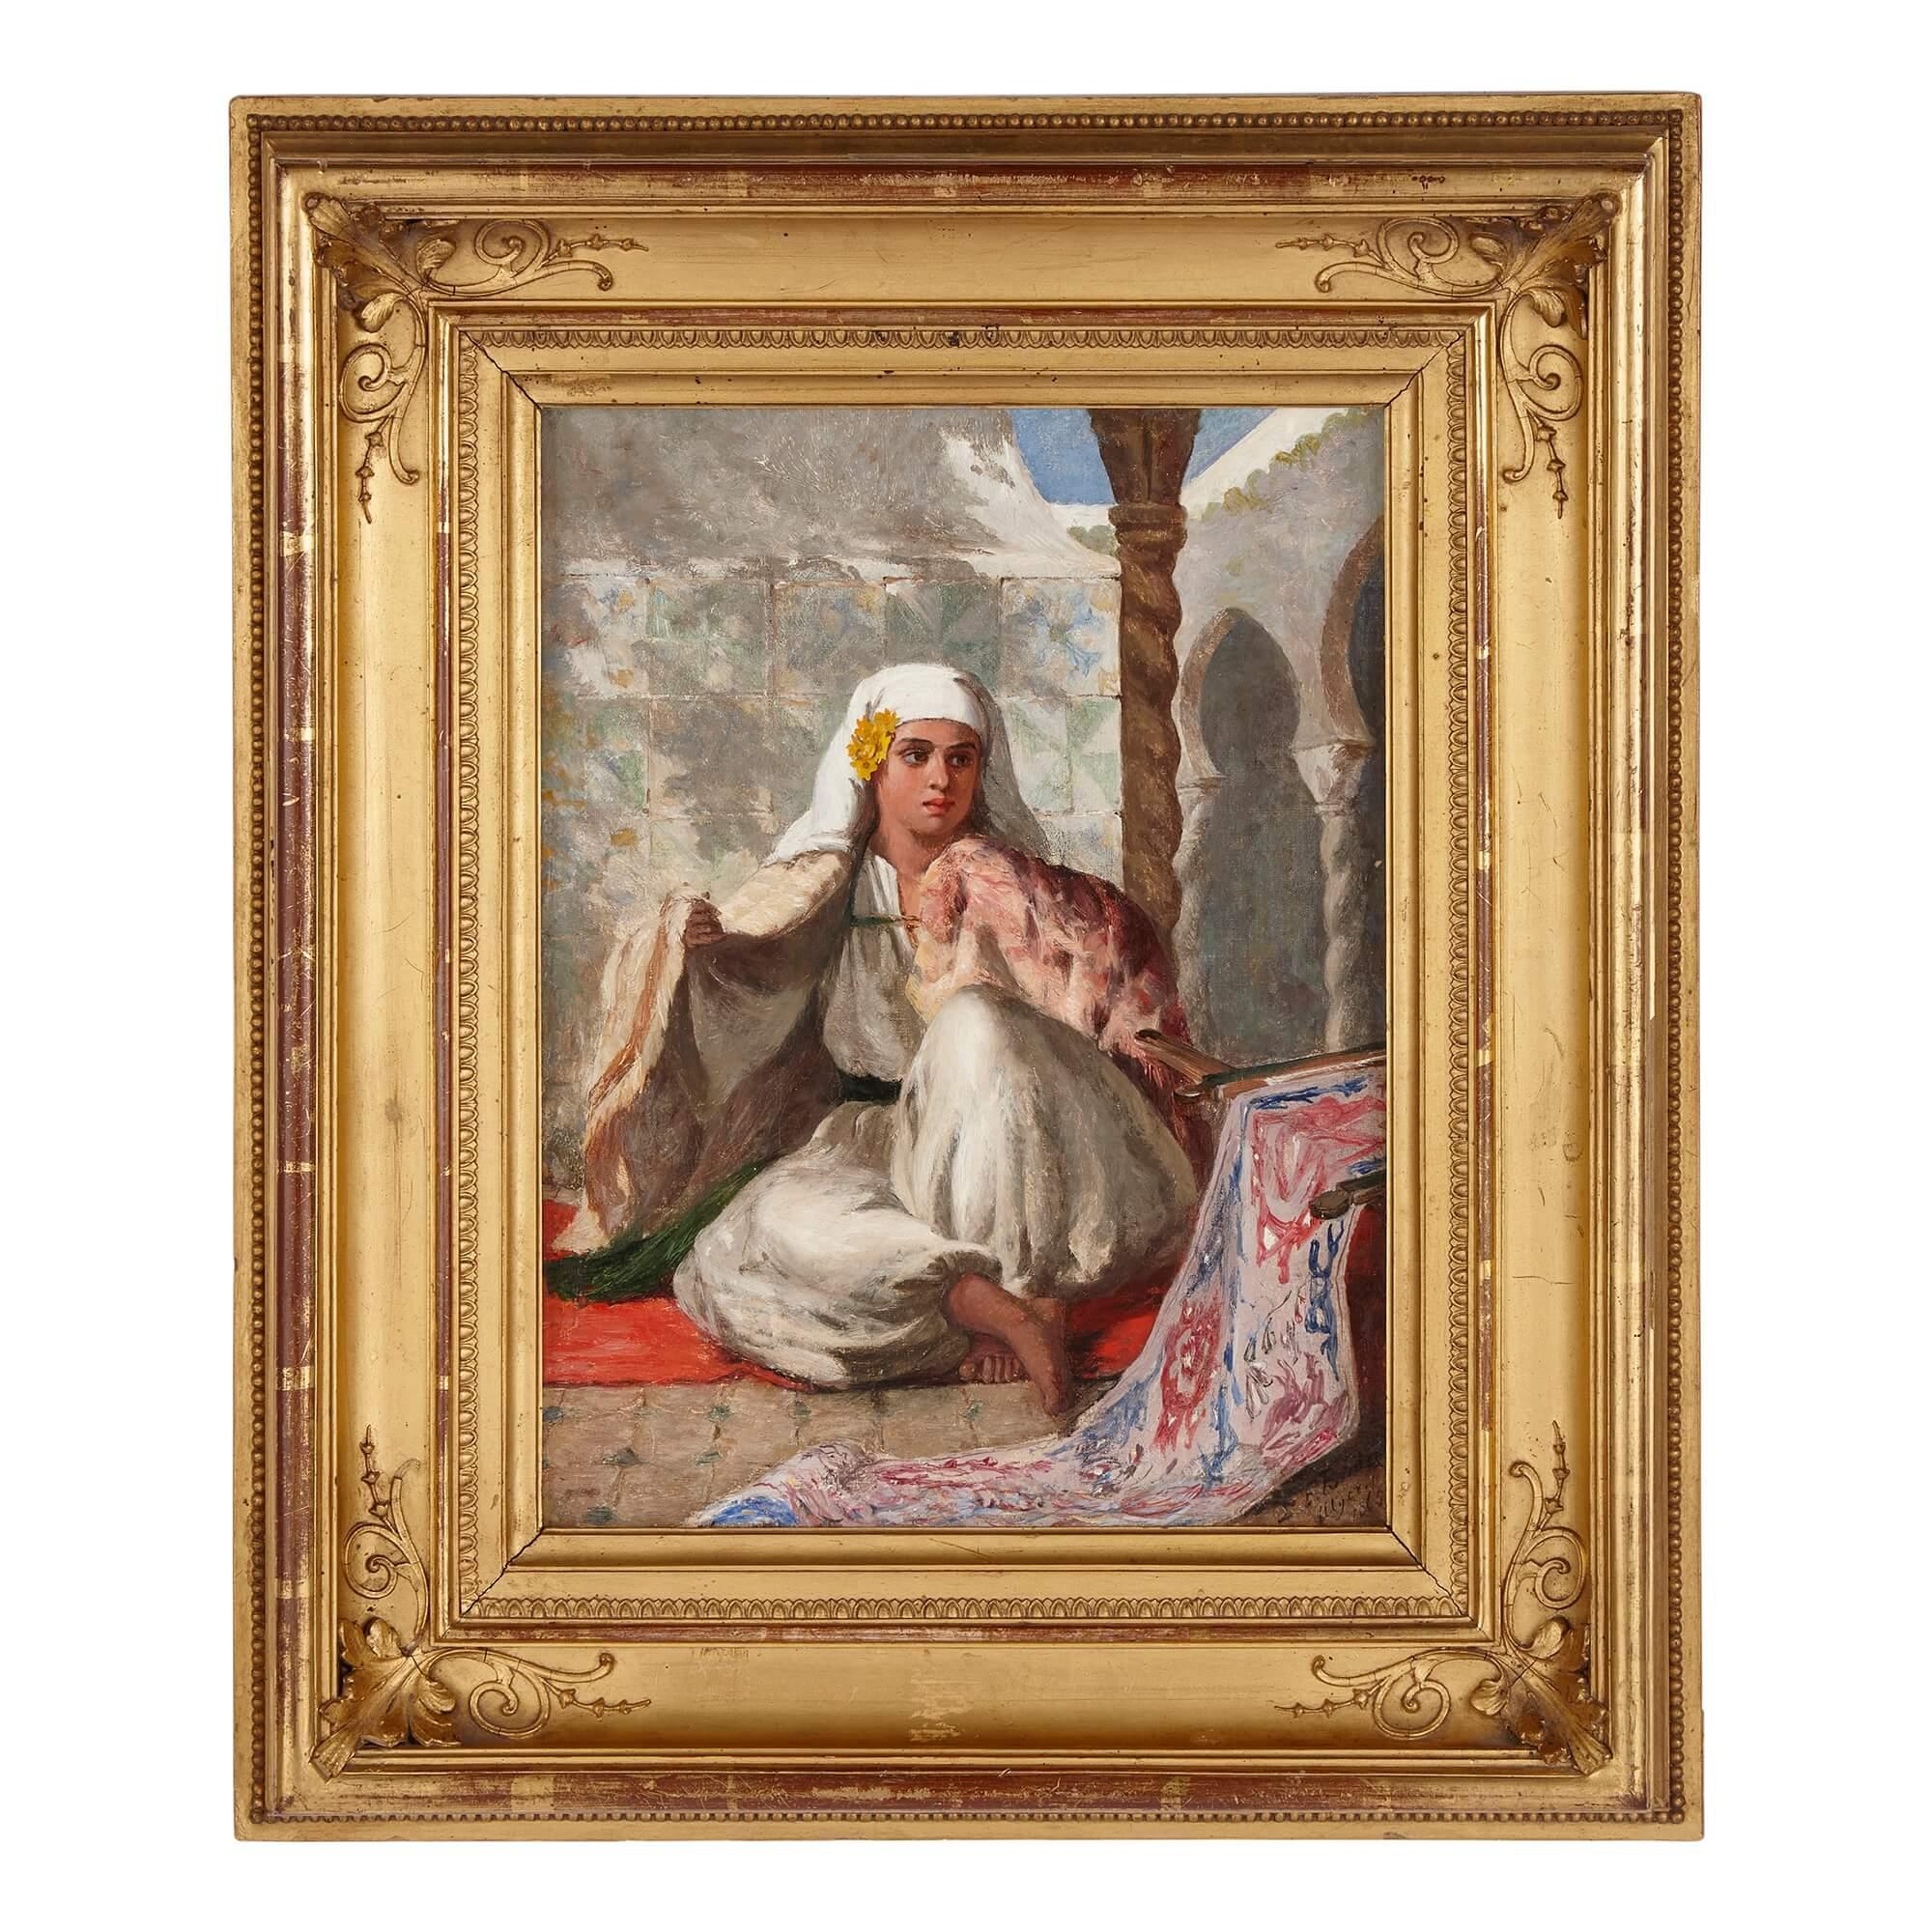 Orientalist portrait painting by Bridell-Fox, 1865
English, 1865
Canvas: Height 33cm, width 25cm
Frame: Height 49.5cm, width 42cm, depth 6cm

This intimate portrait depicts a seated Algerian woman. The subject looks to her left at something beyond